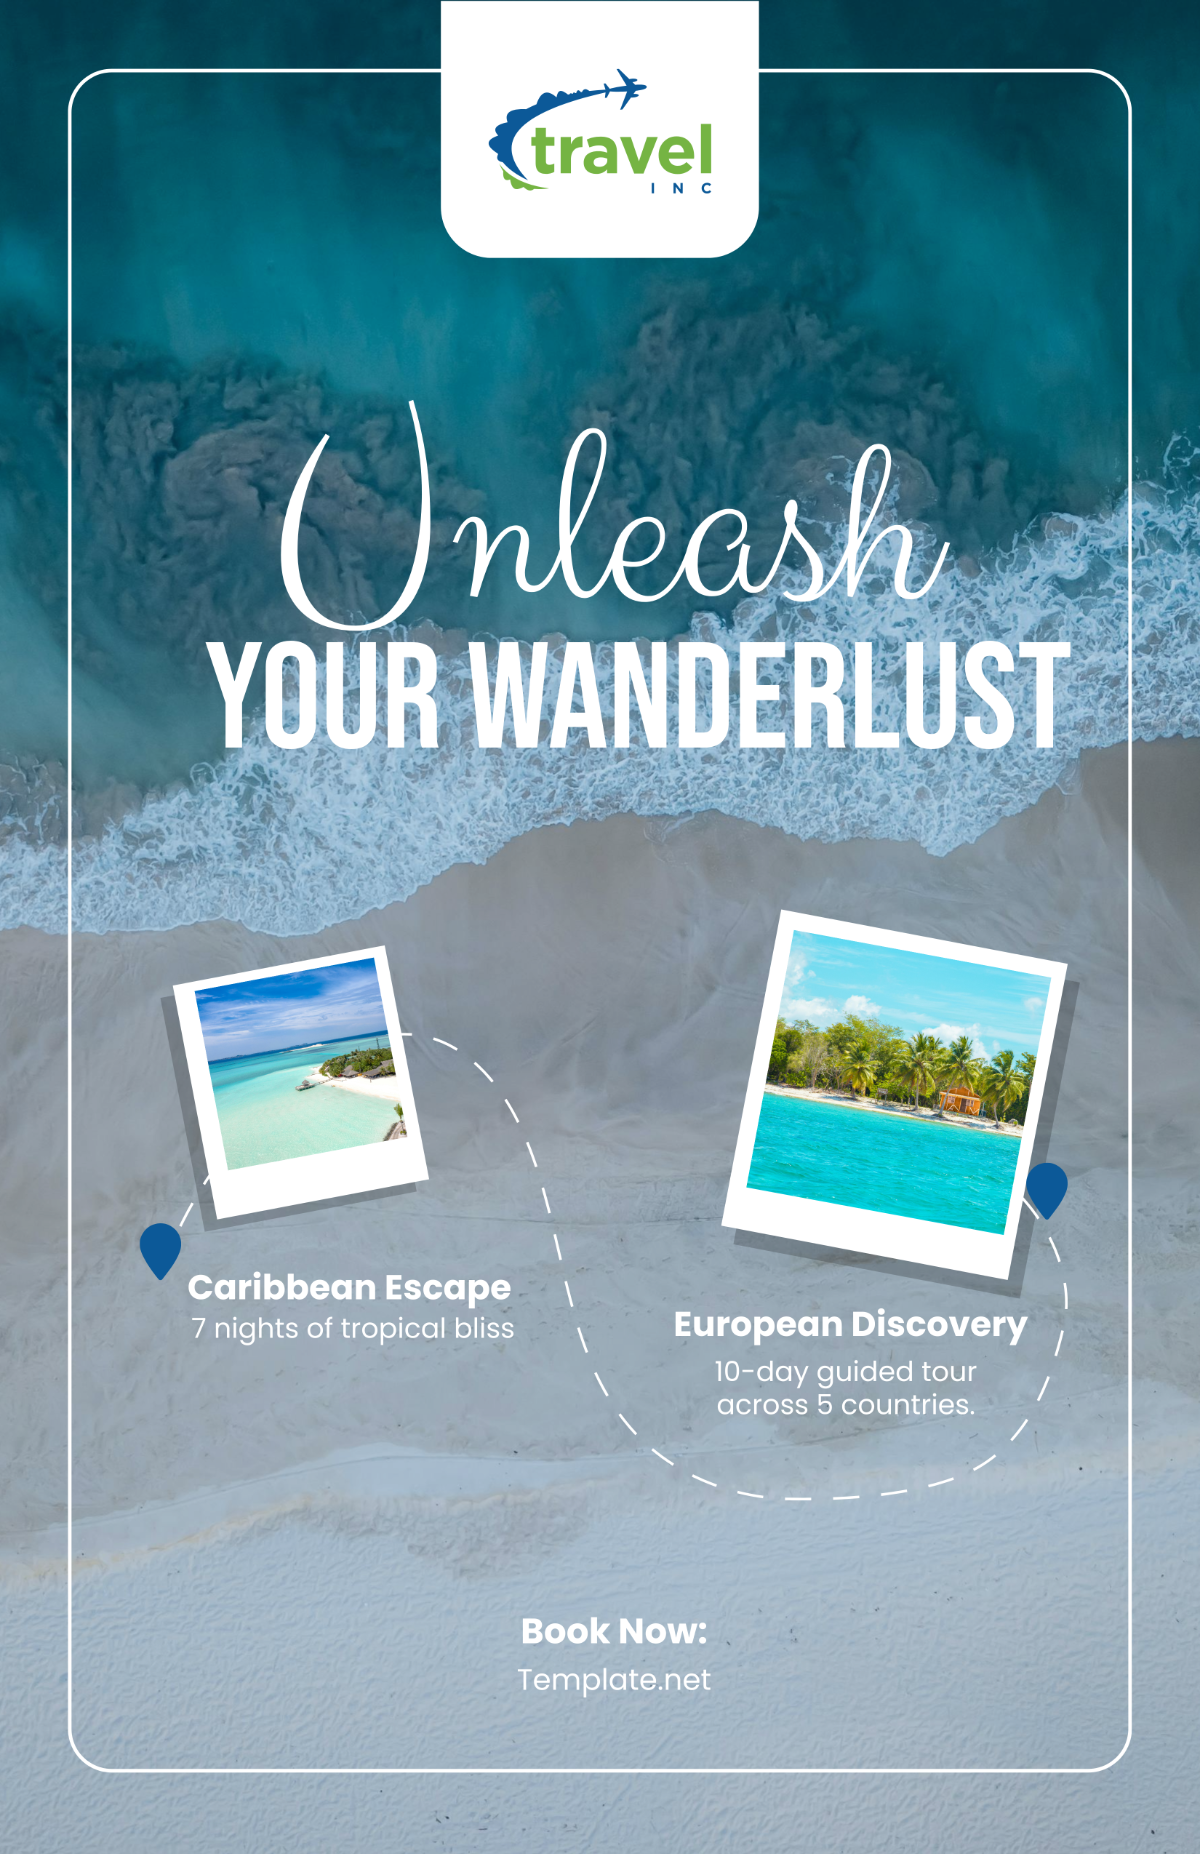 Travel Agency Campaign Poster Template